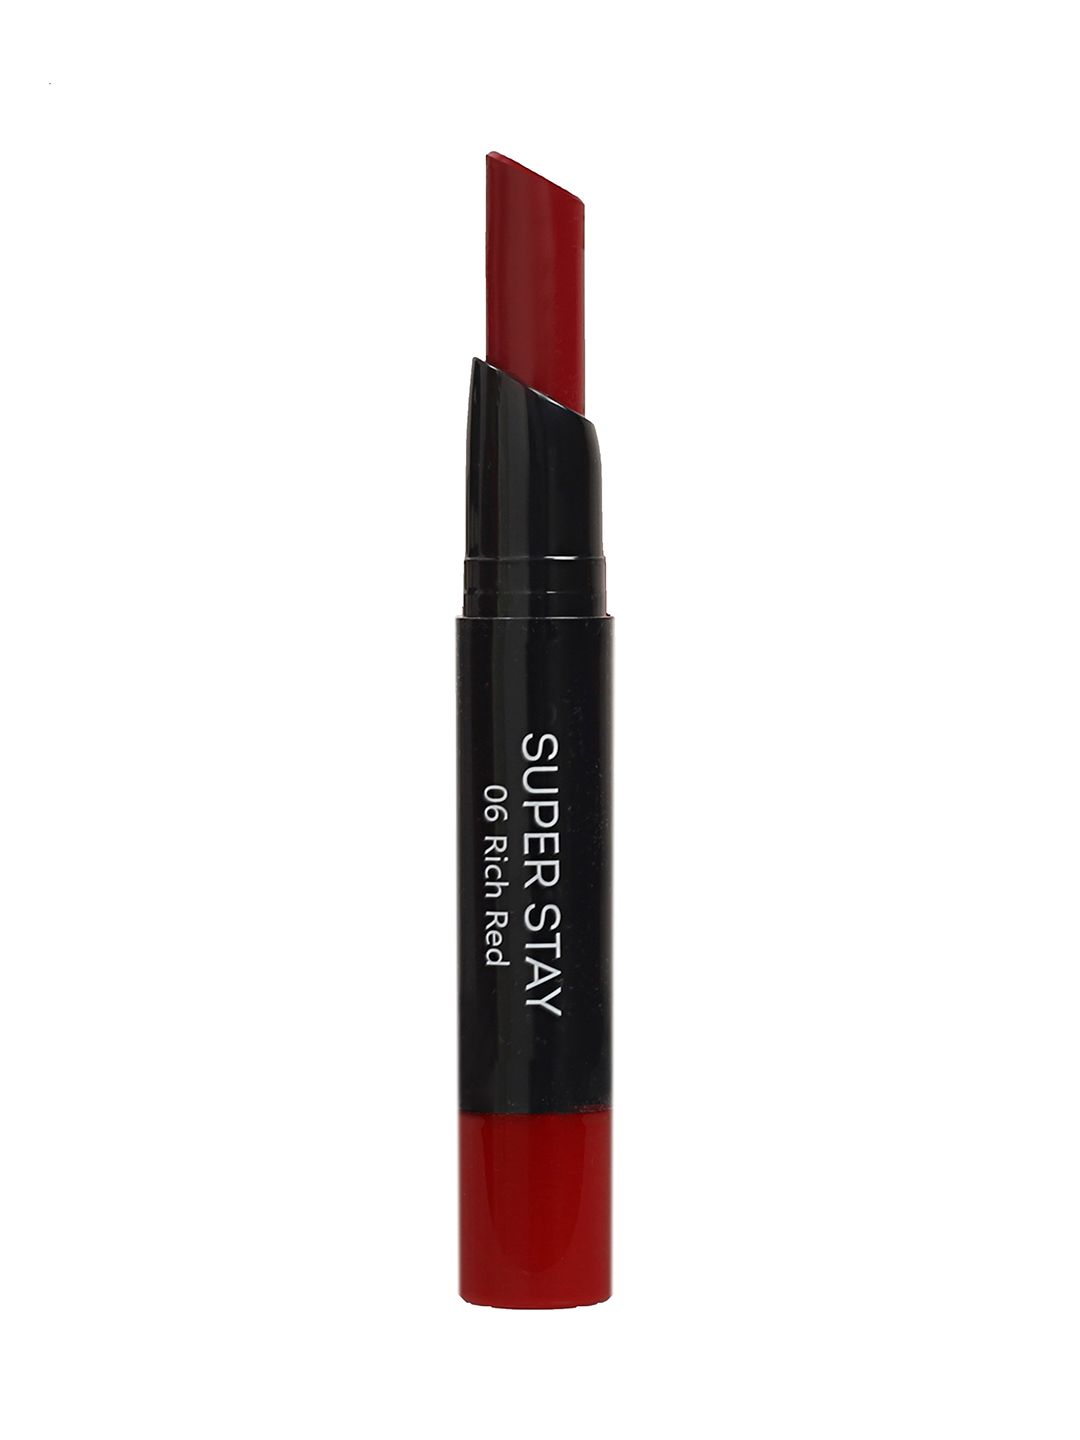 ME-ON Super Stay Matte Lipstick - Rich Red 06 2g Price in India